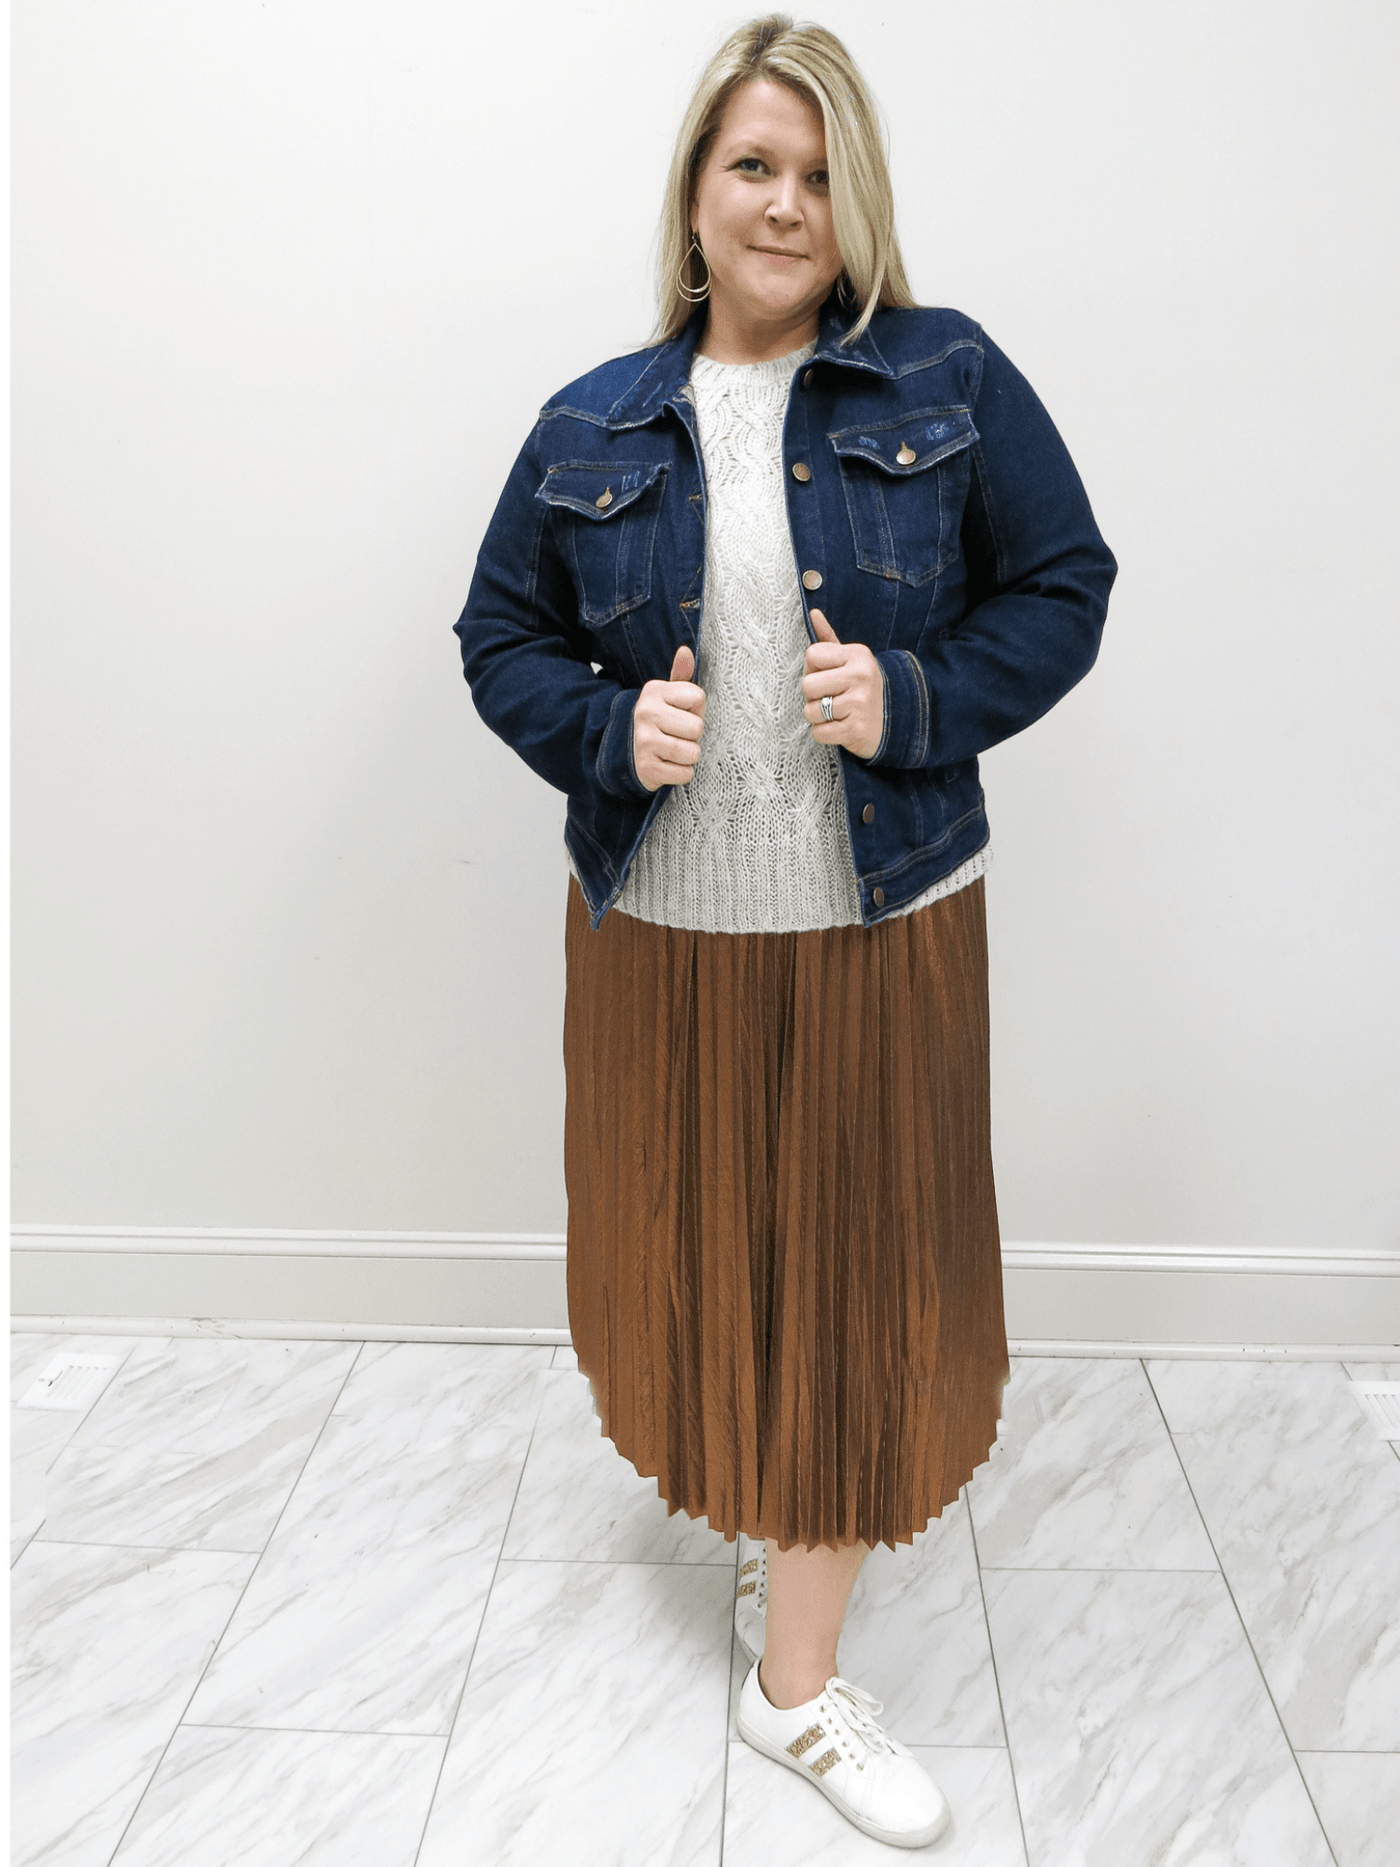 Molly Bracken Metallic pleated skirt with Molly Bracken Metallic Sweater and Risen jean jacket full front view, xl model.